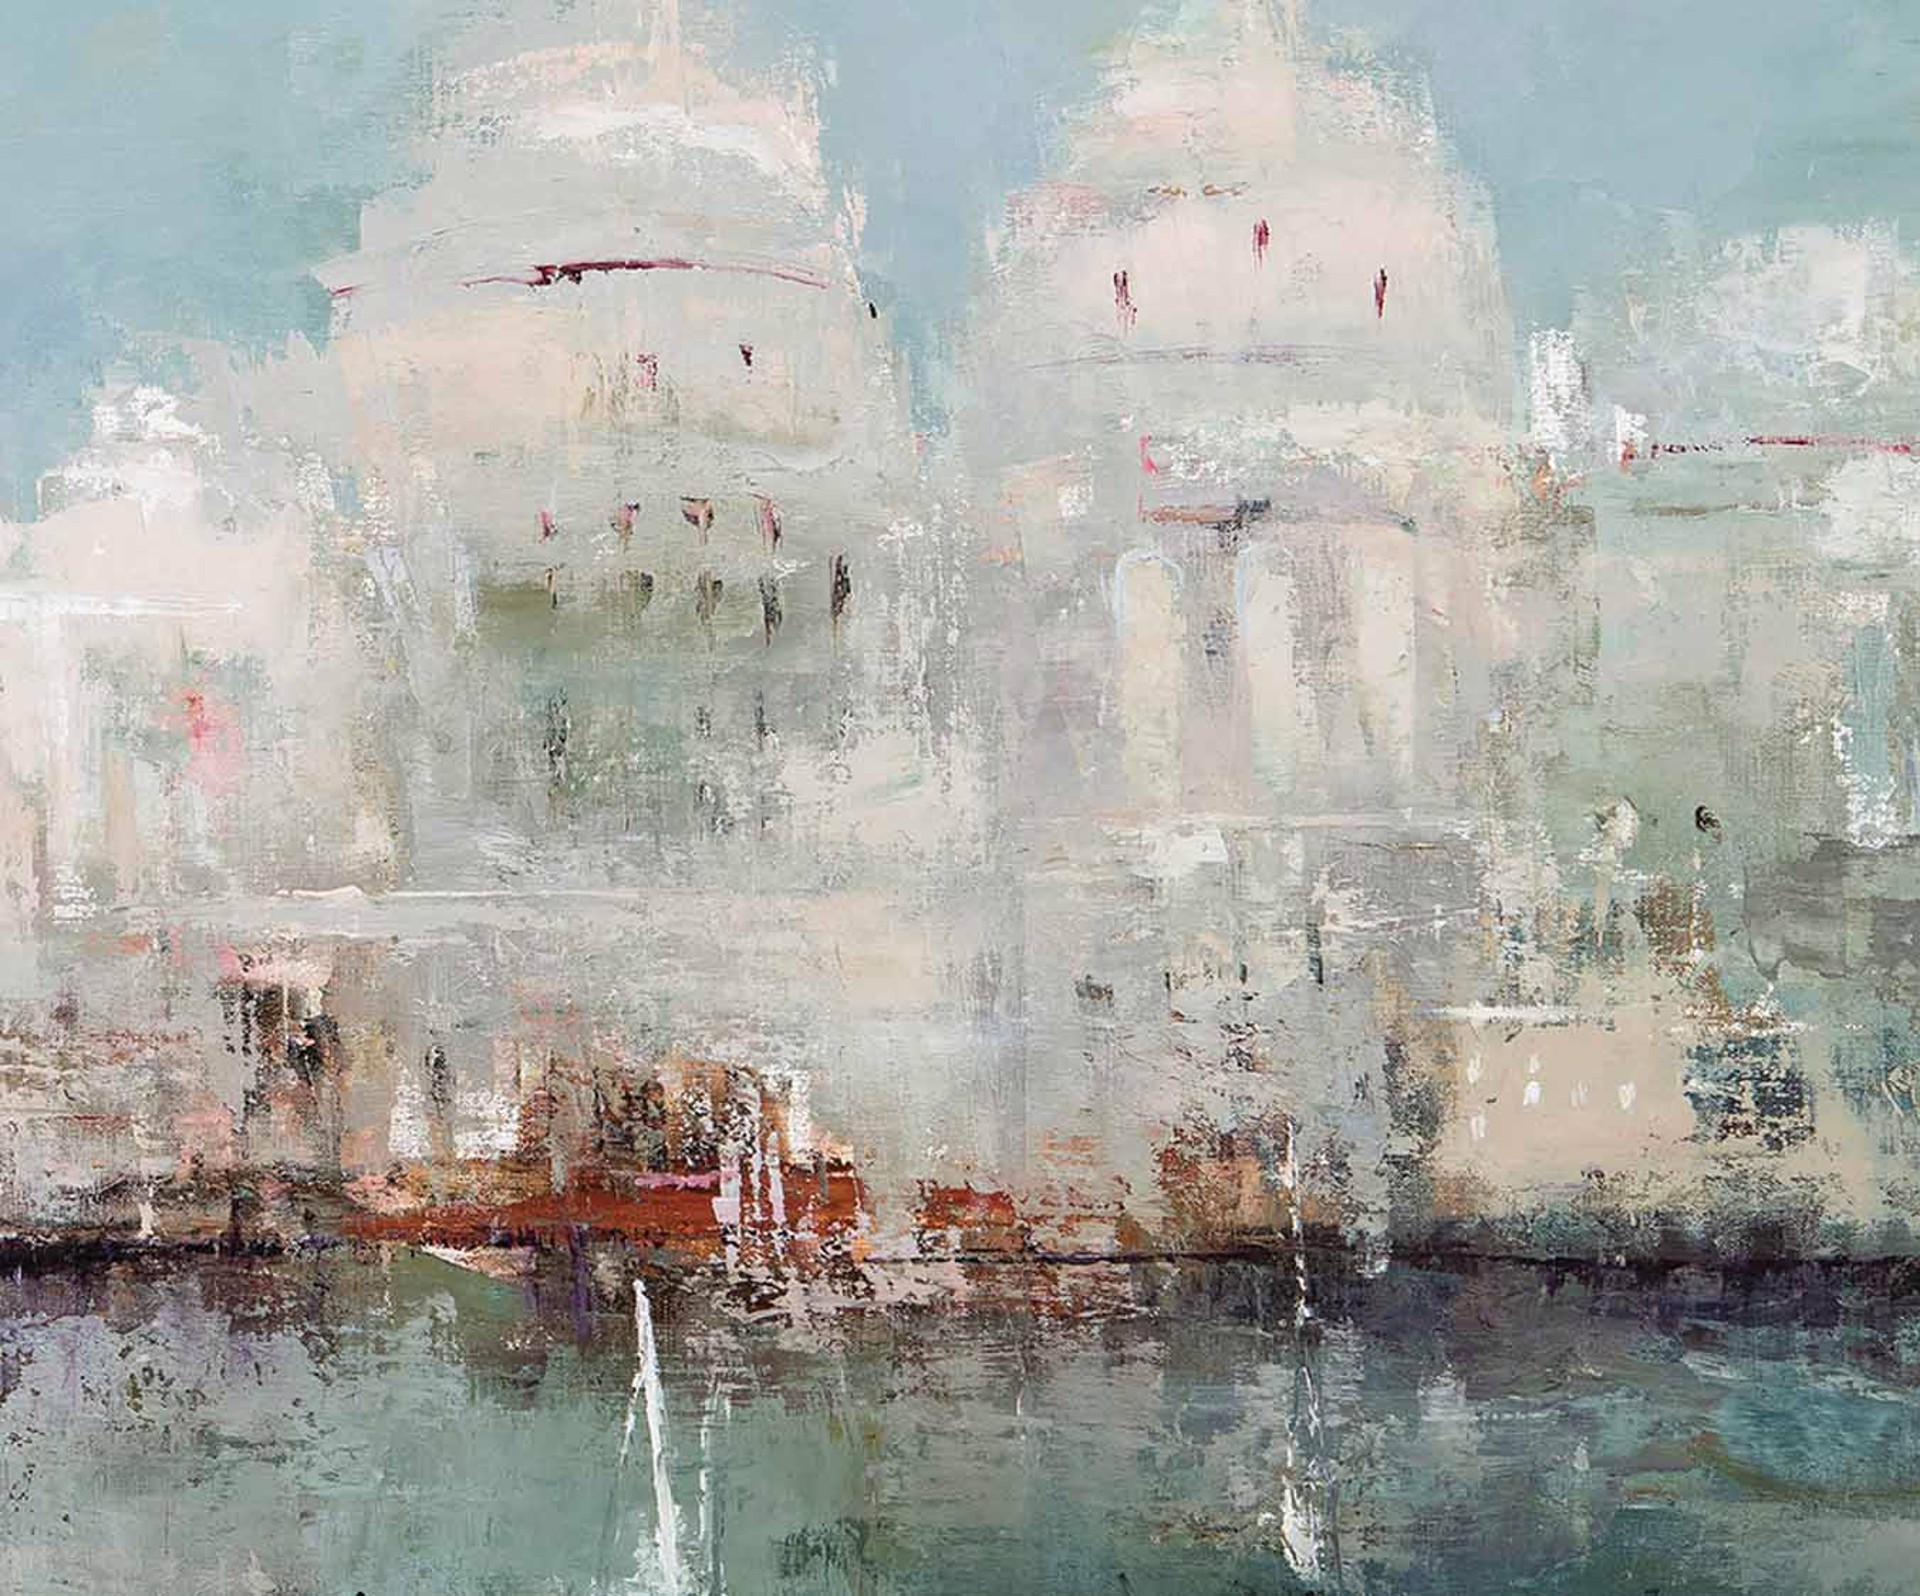 Down Silent Courts and Secret Passages by France Jodoin